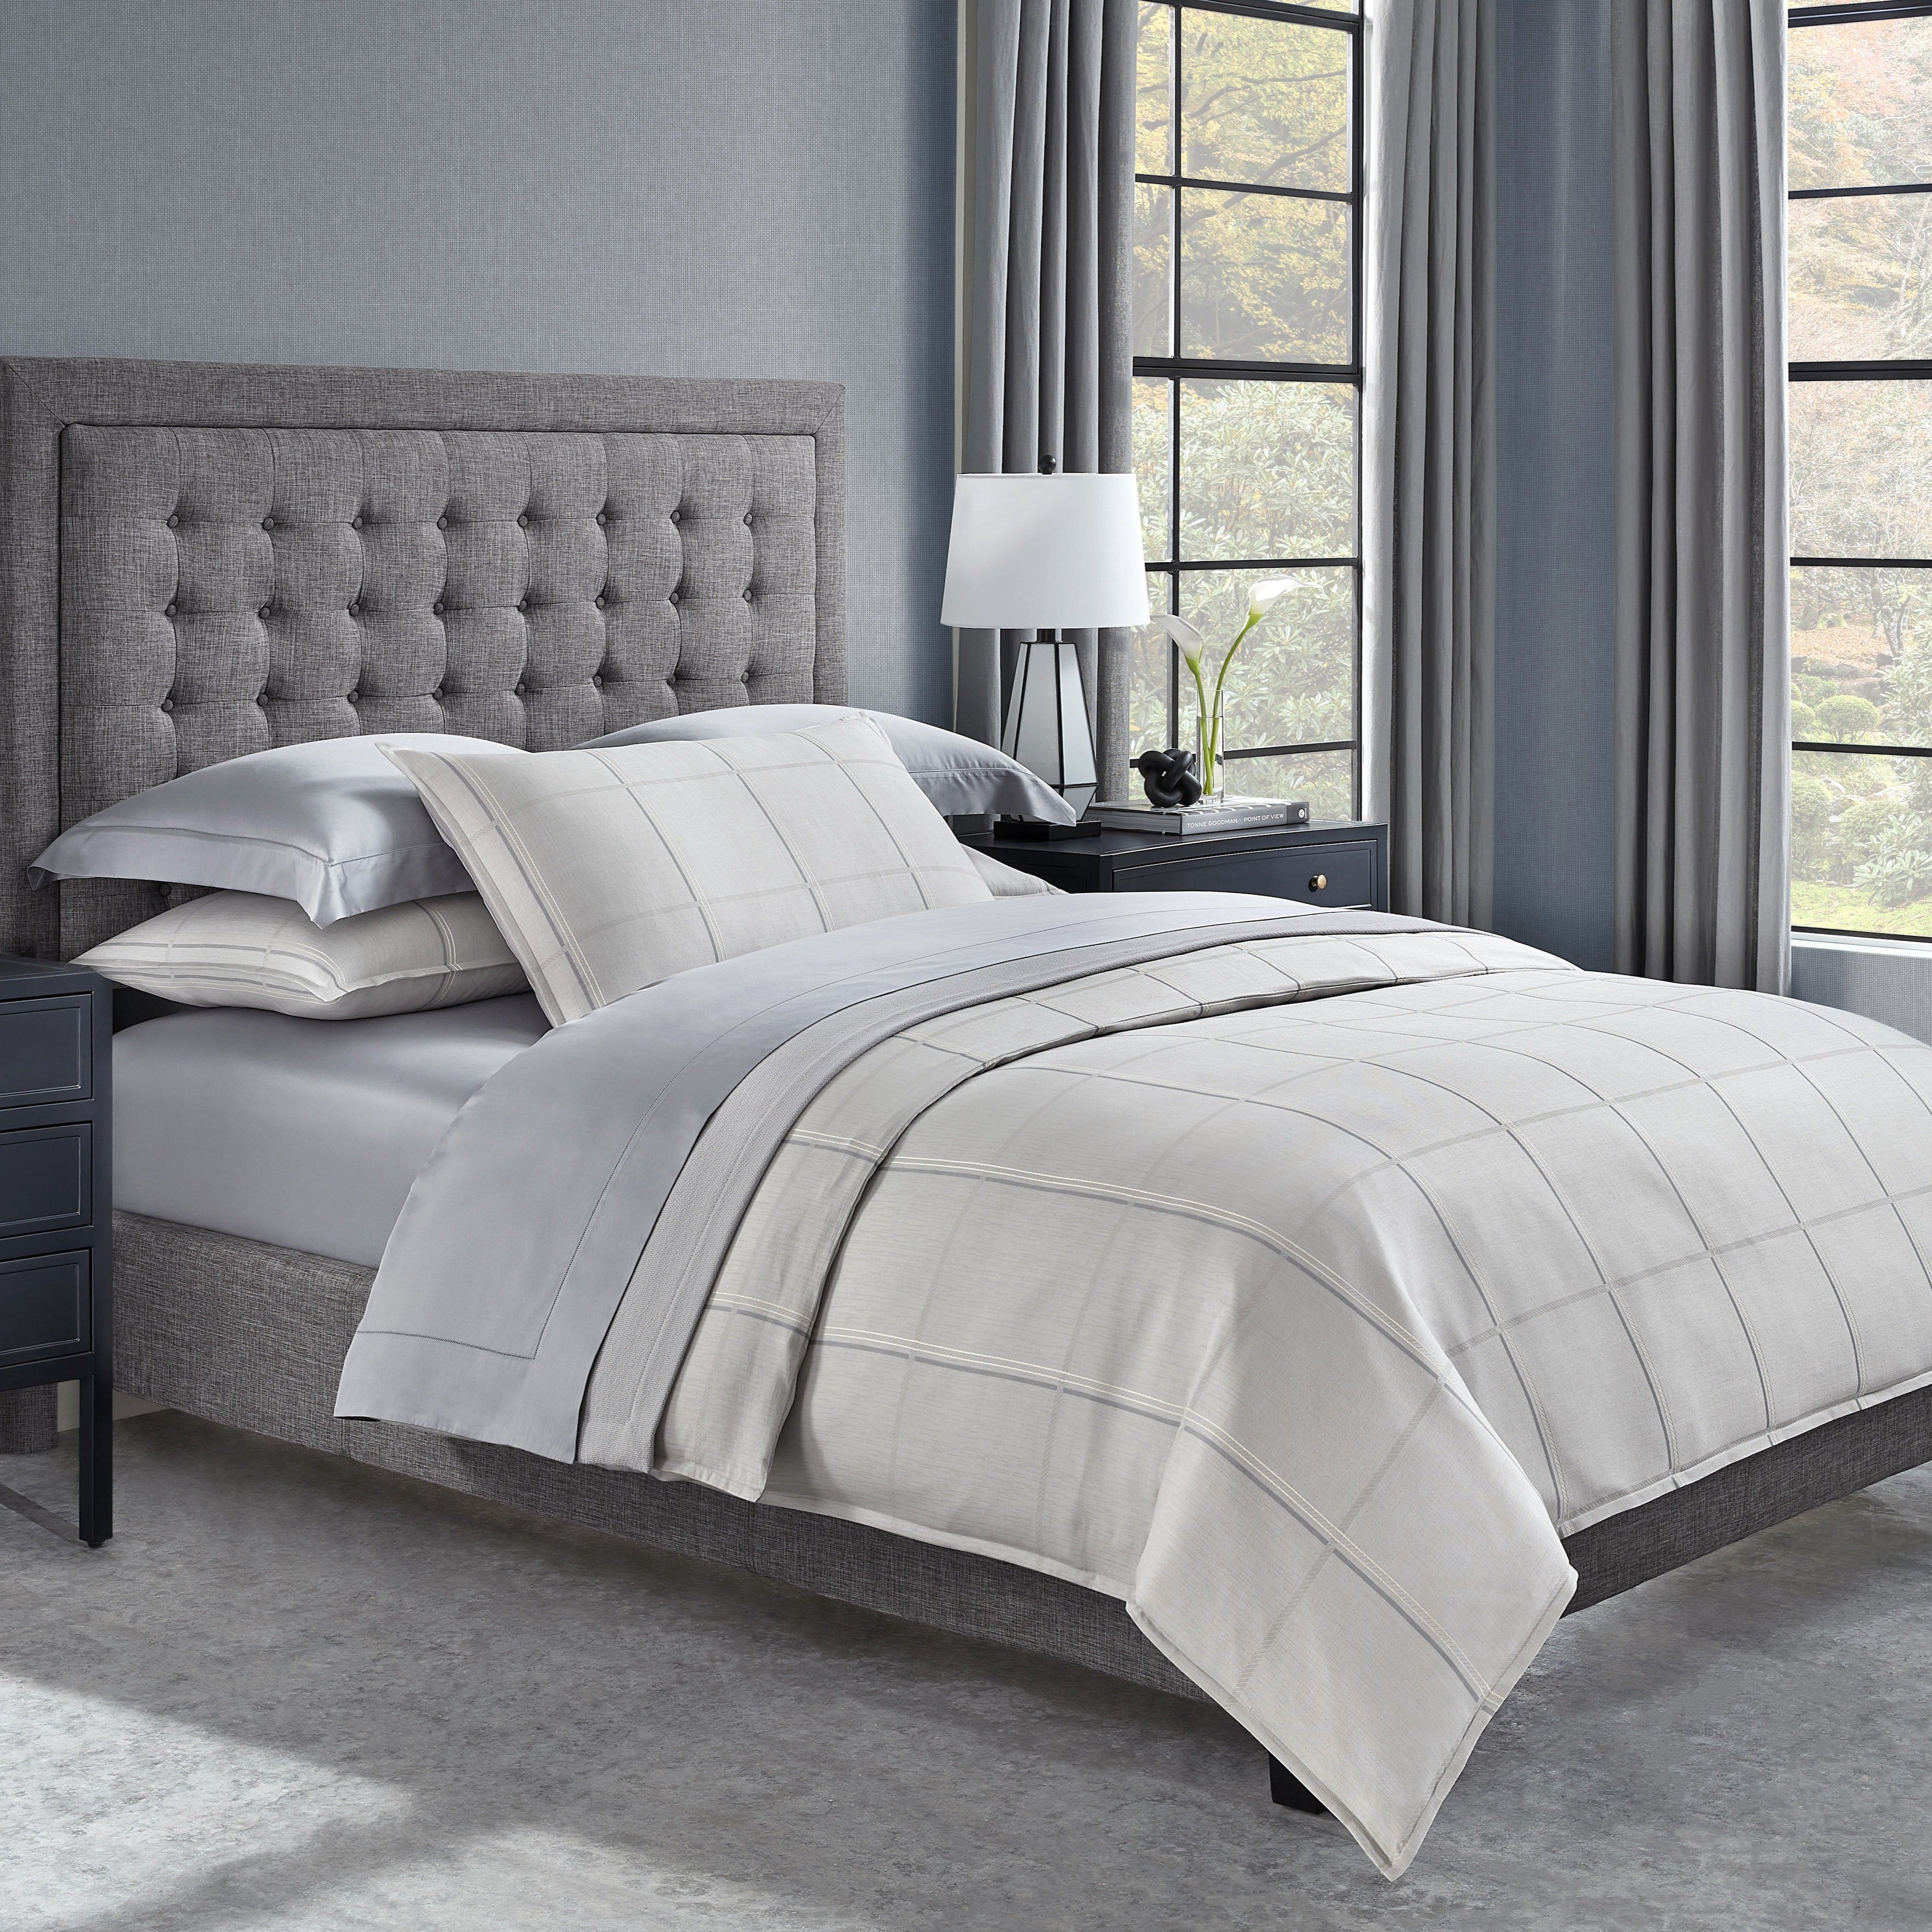 Tronto Bed Linens